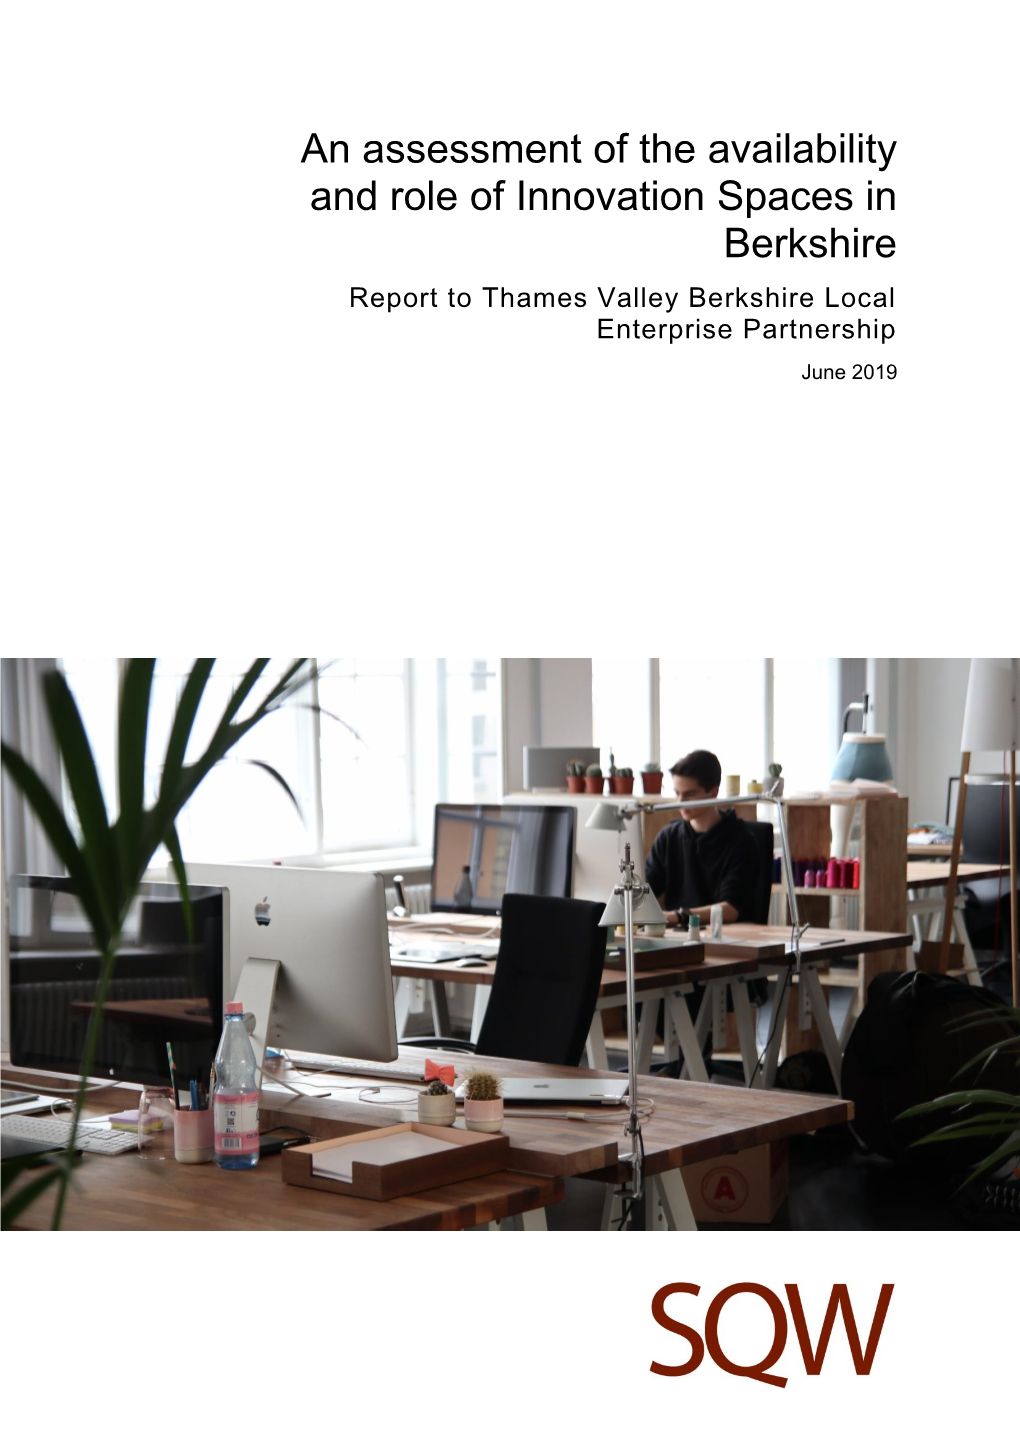 An Assessment of the Availability and Role of Innovation Spaces in Berkshire Report to Thames Valley Berkshire Local Enterprise Partnership June 2019